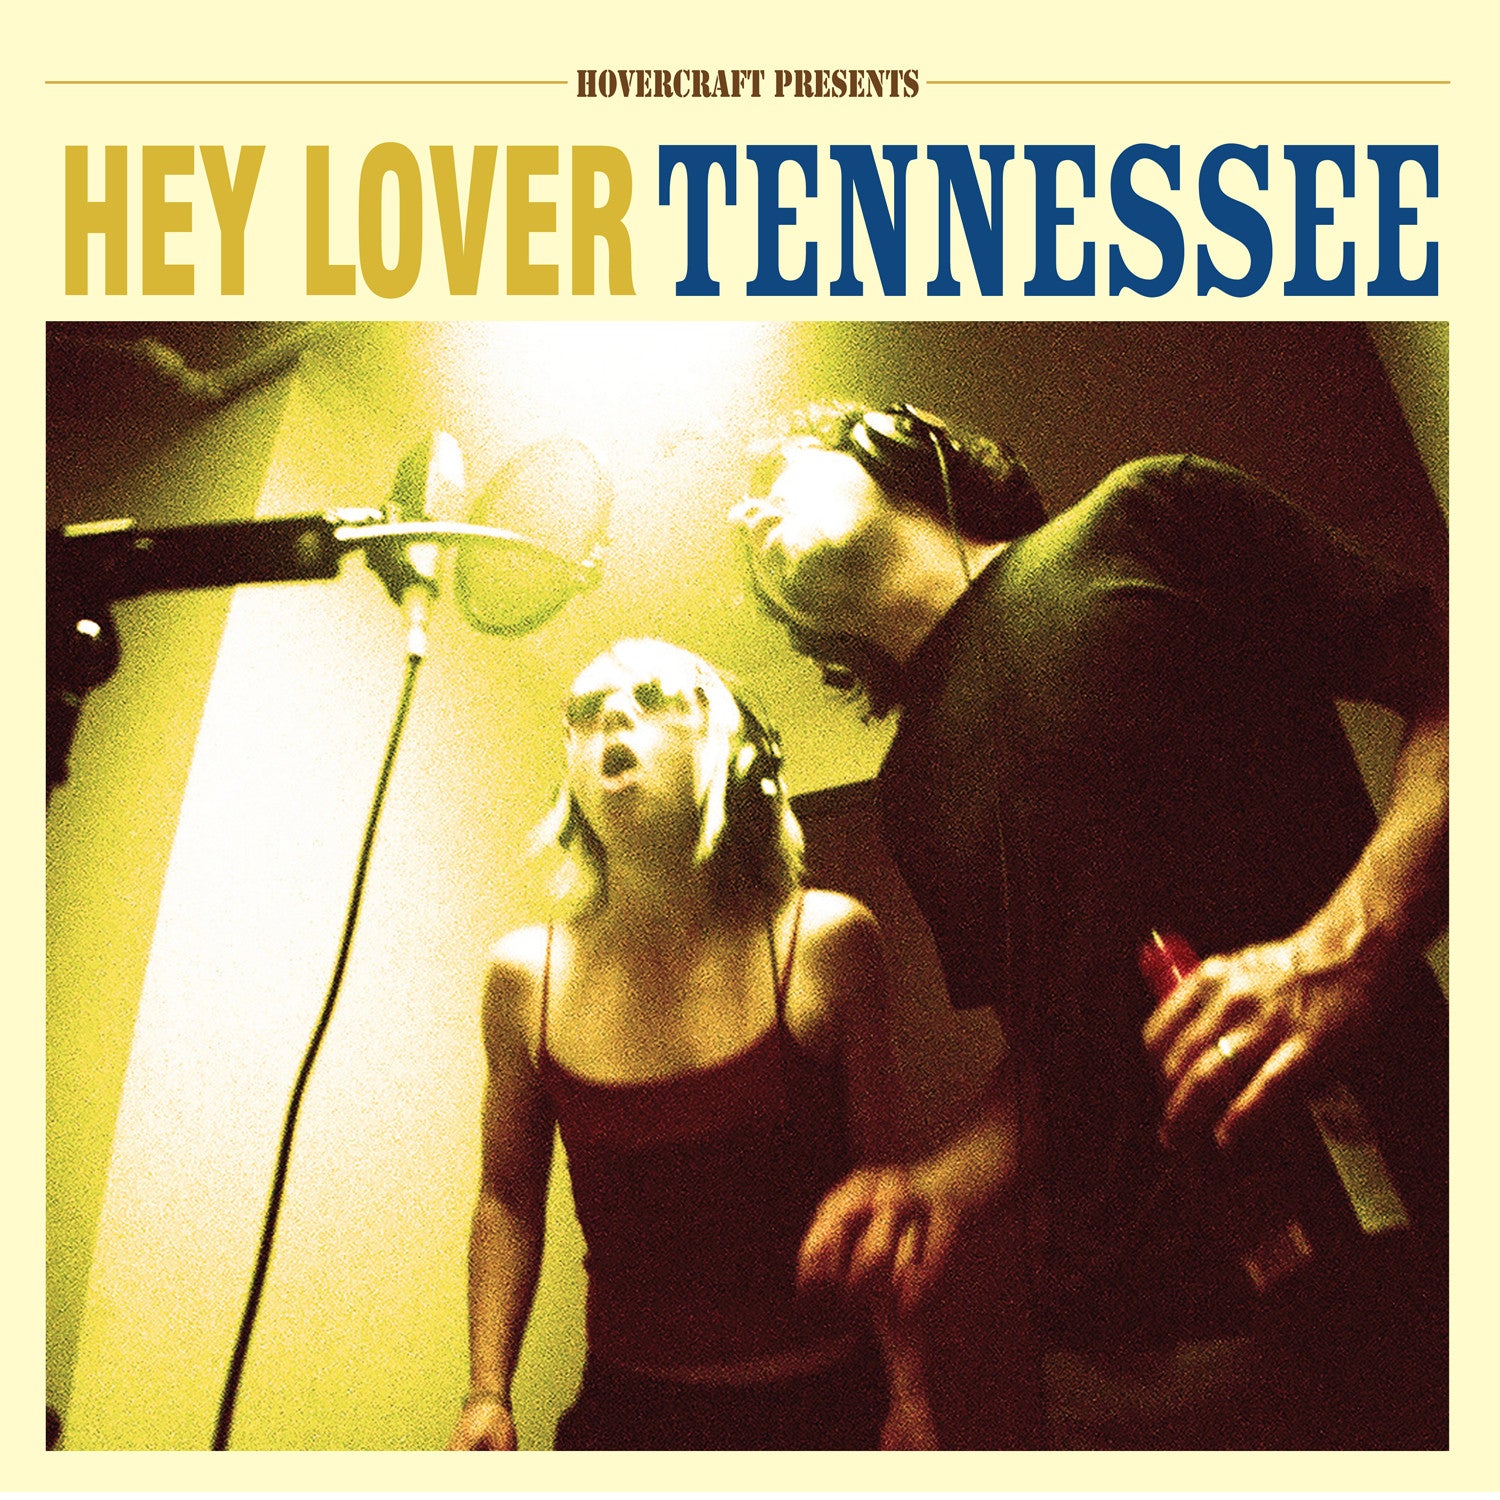 Hey Lover- Tennessee LP ~THE MUFFS/CUB - Hovercraft - Dead Beat Records